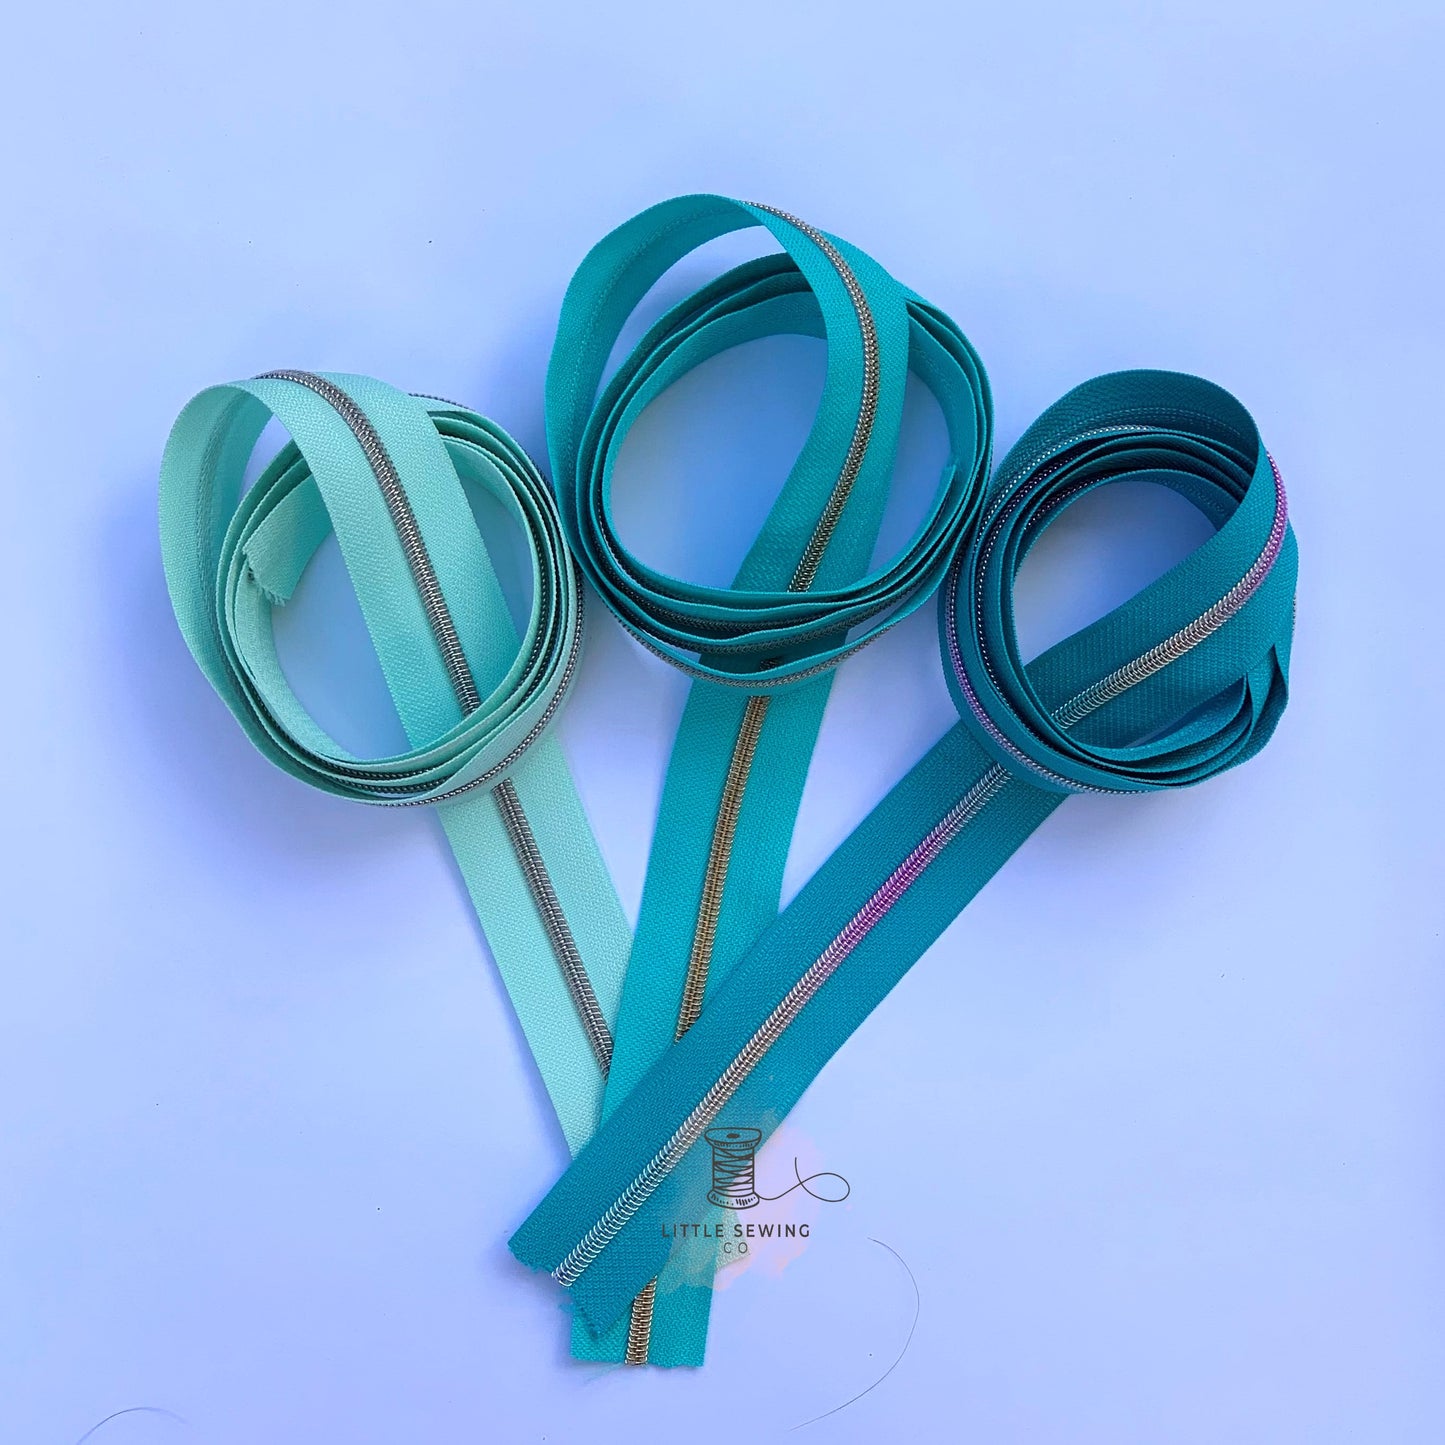 Pale Turquoise Zipper Tape #3